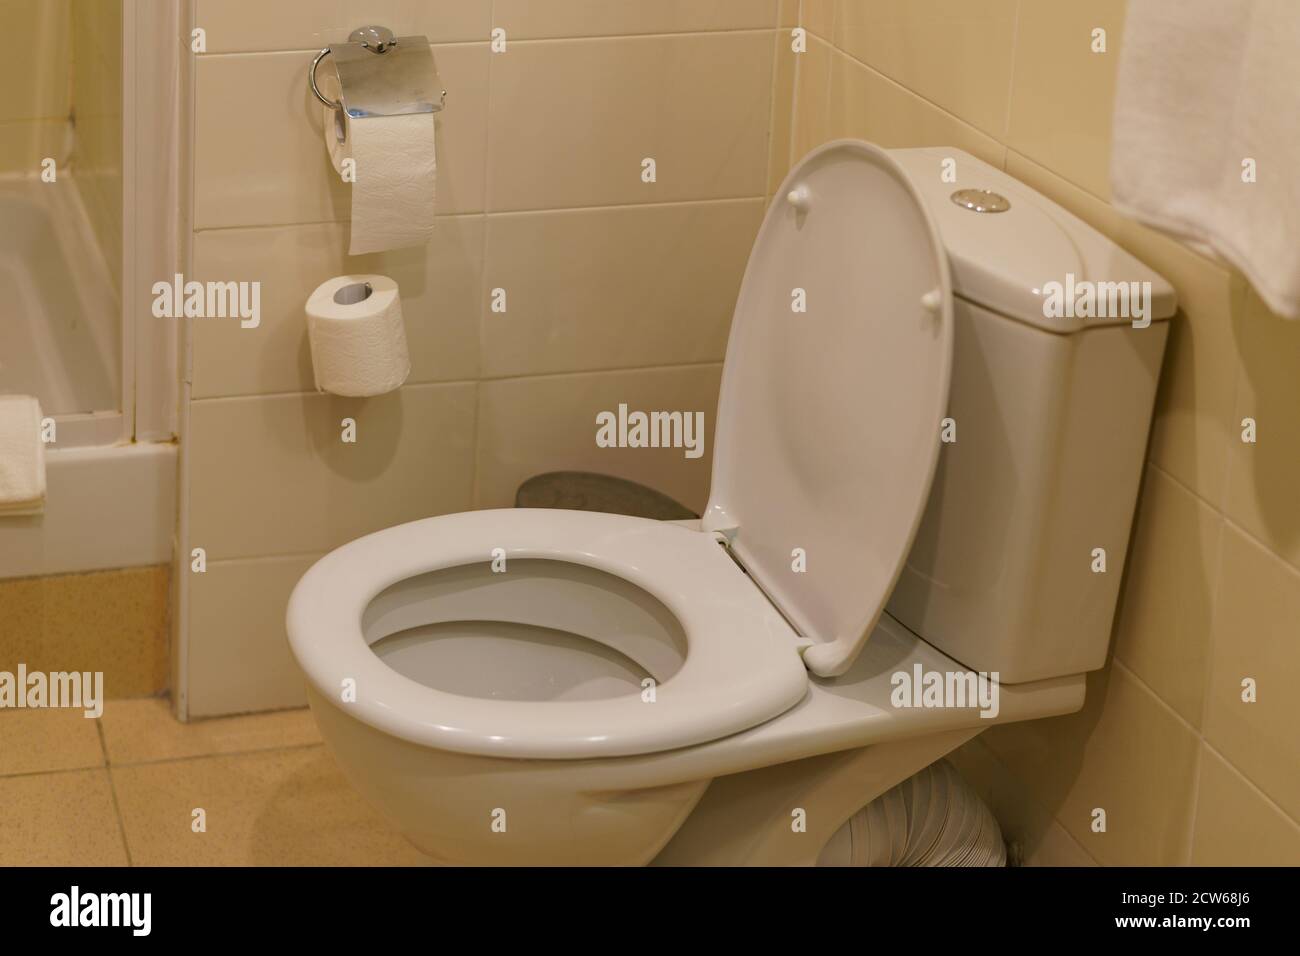 Modern bathroom in the hotel. White toilet bowl. A roll of white clean toilet paper hangs in front of a beautifully tiled wall. Shower cubicle. Soft b Stock Photo